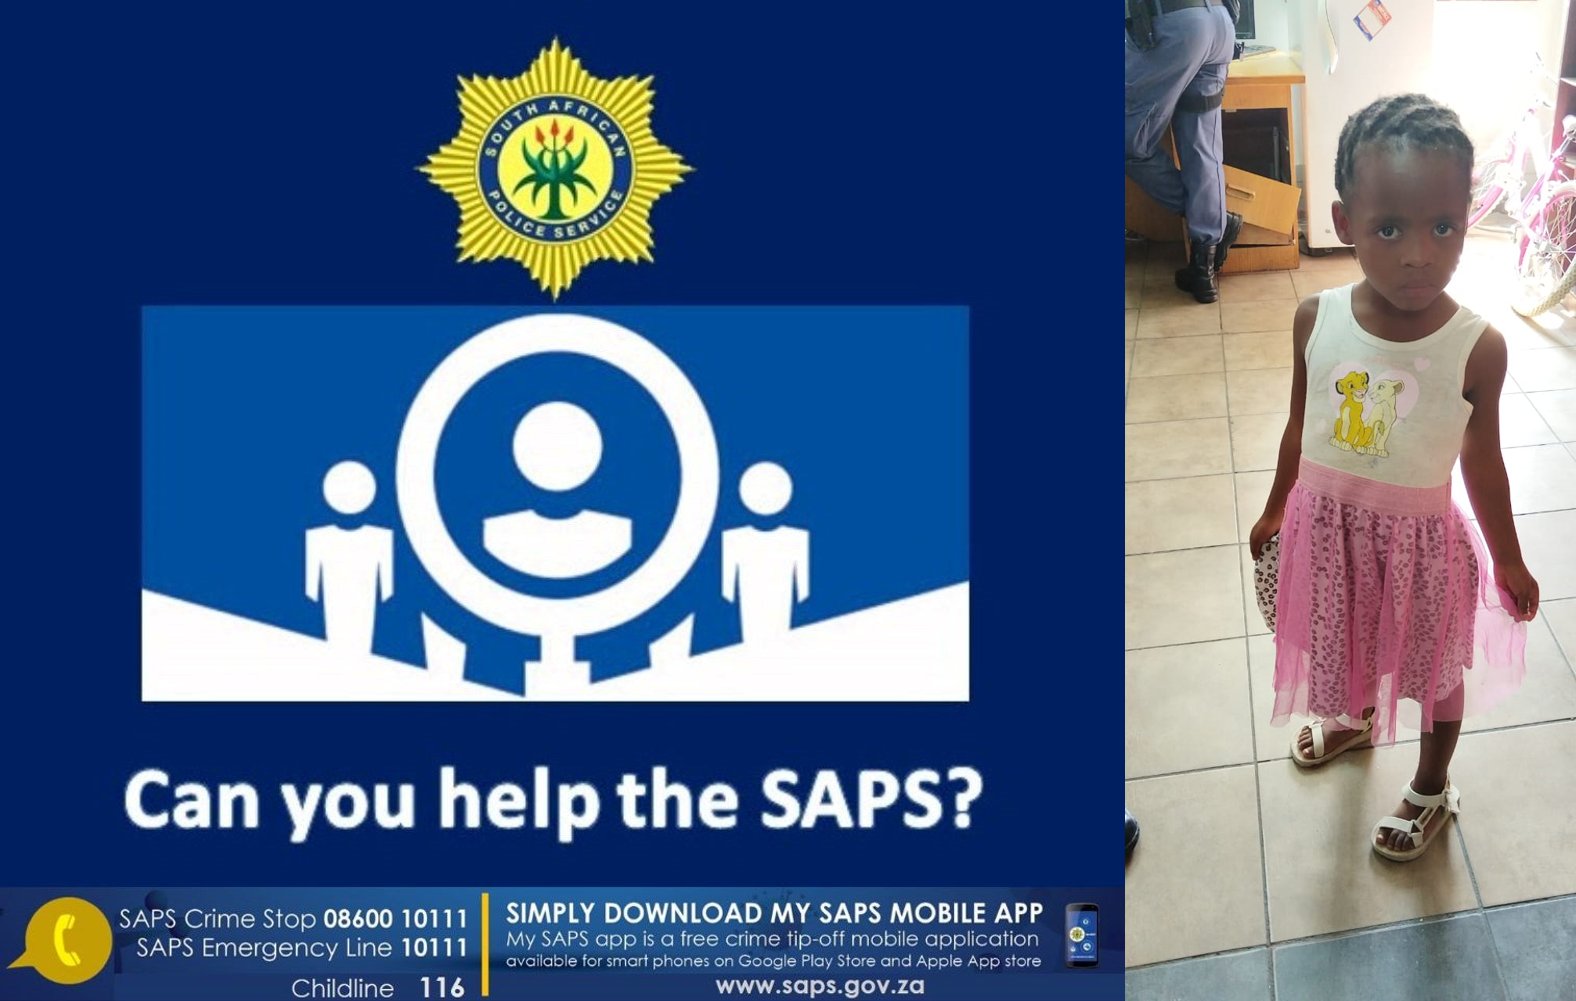 Help locate parents of four-year-old Pulane, found lost in Mangaung